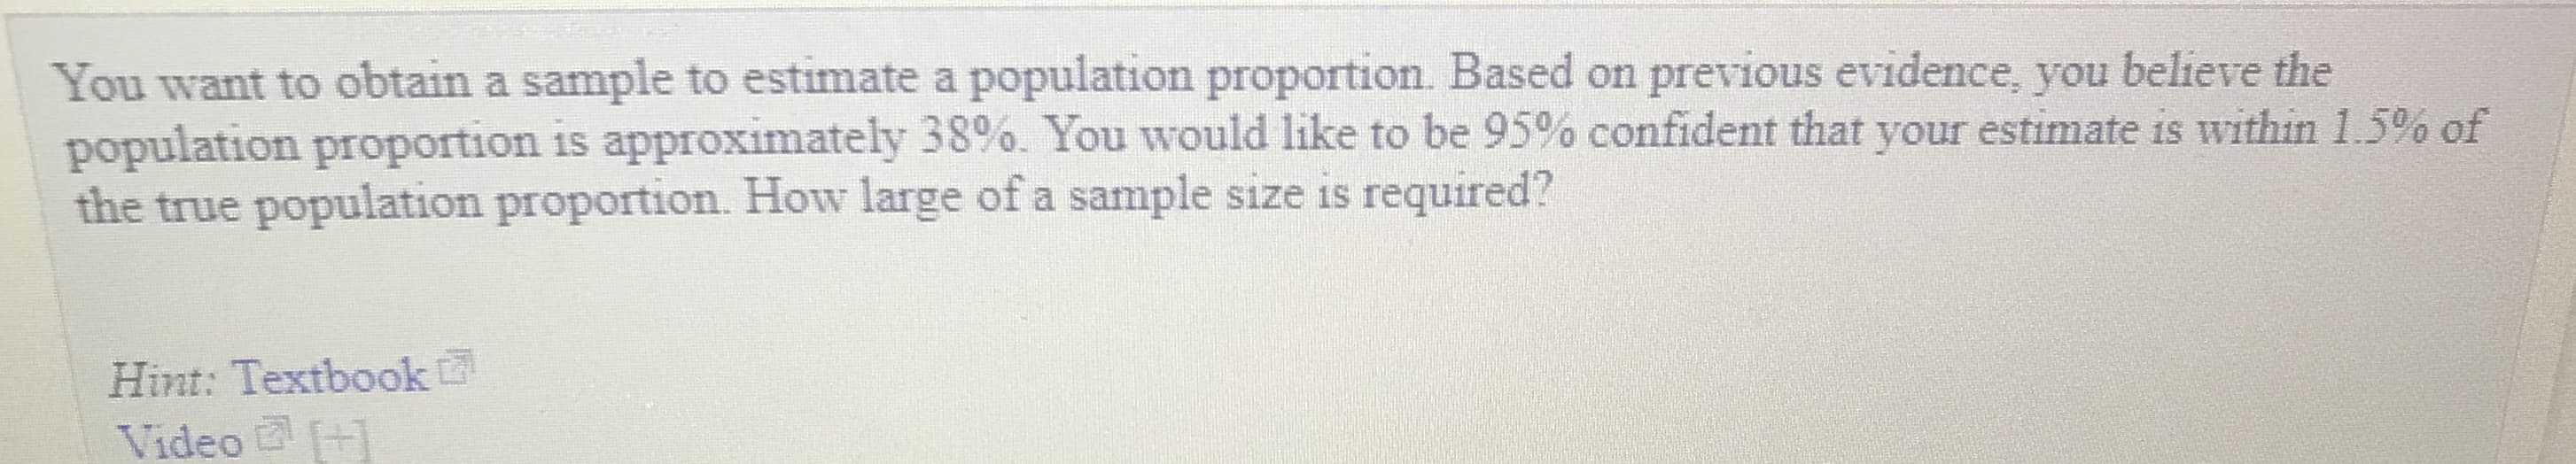 You want to obtain a sample to estimate a population proportion. Based on previous evidence, you believe the
population proportion is approximately 38%. You would like to be 95% confident that your estimate is within 1.5% of
the true population proportion. How large of a sample size is required?
Hint: Textbook
Video
